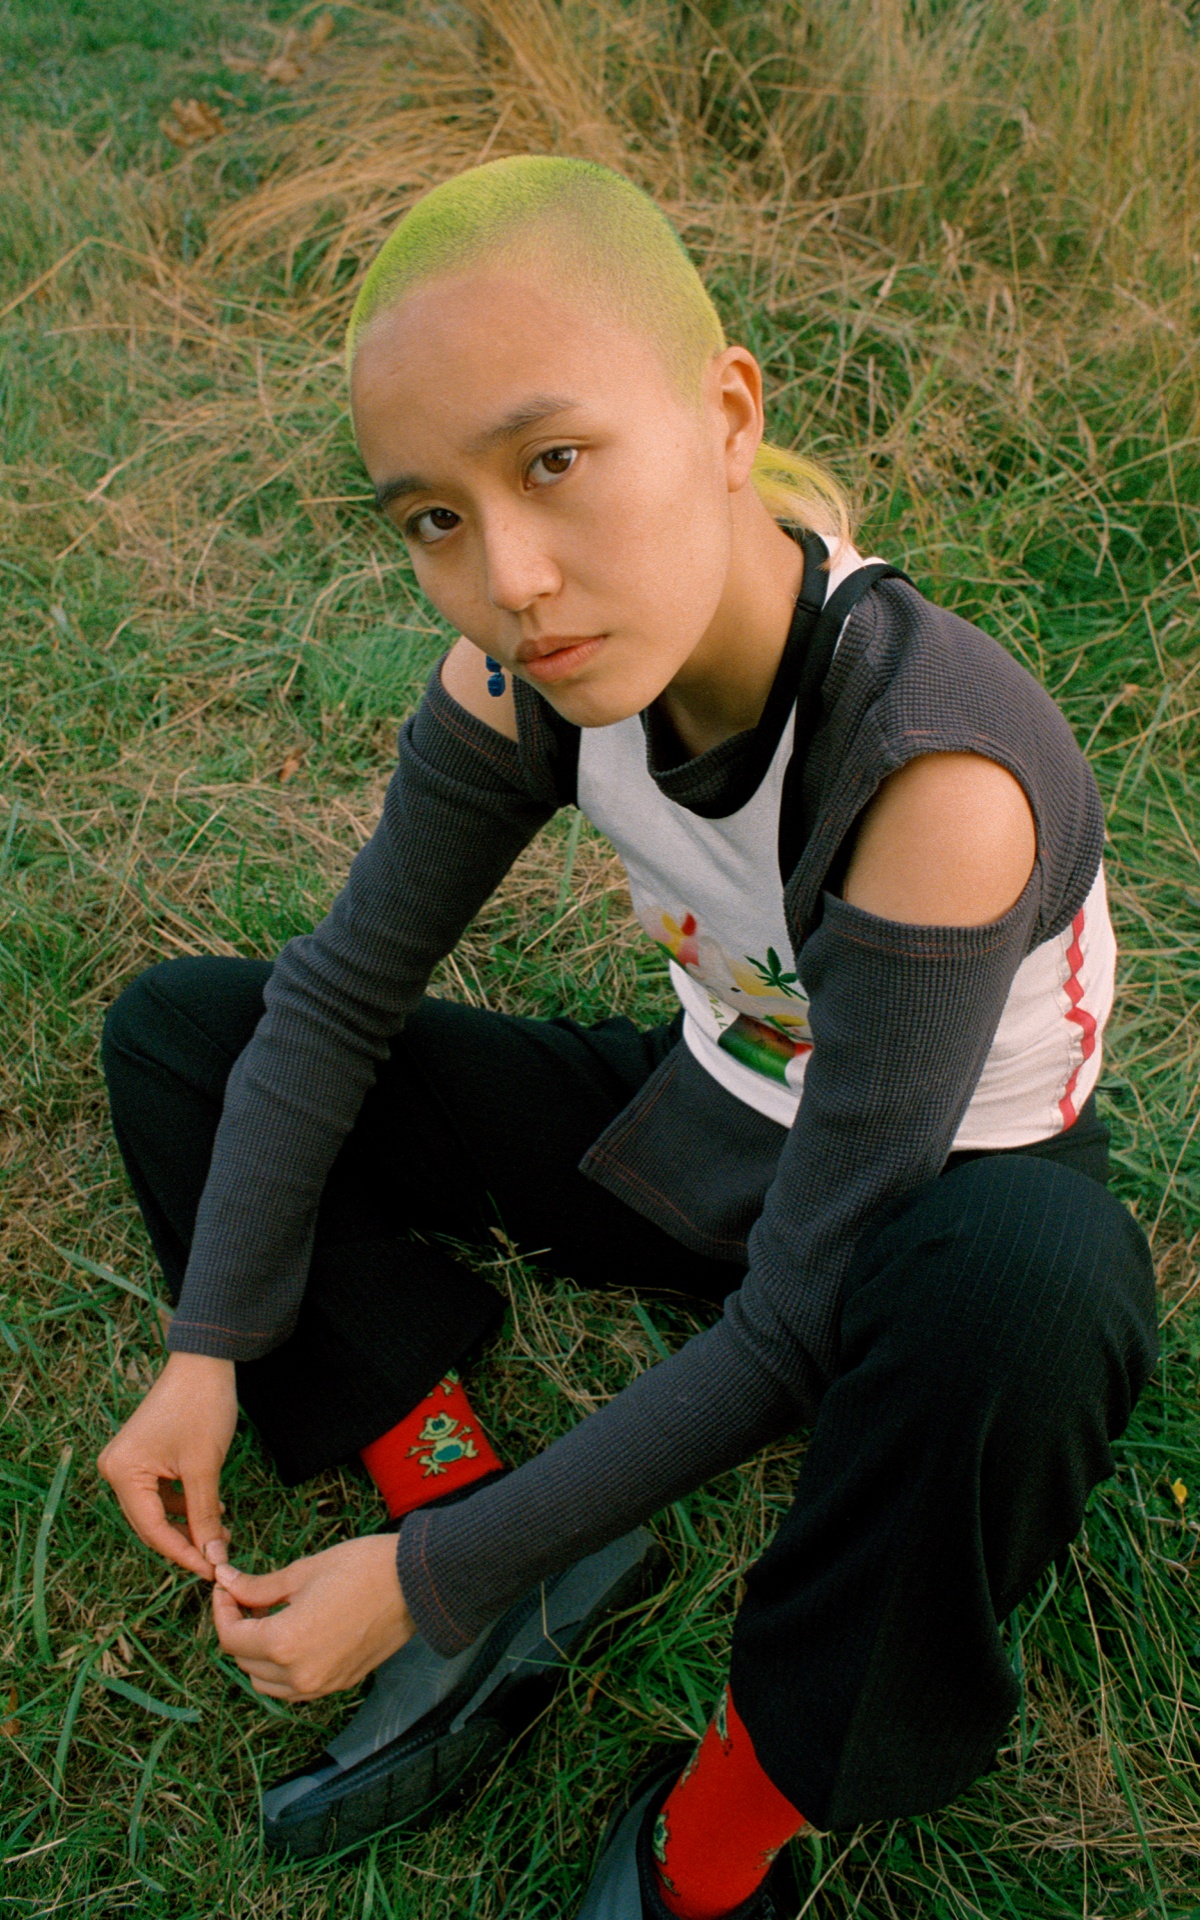 April sits on the grass crosss legged, ad looks upwards towards the camera. She has a shaved hair cut which is dyed a lime green colour and wears black trousers, a long sleeved grey and white top.